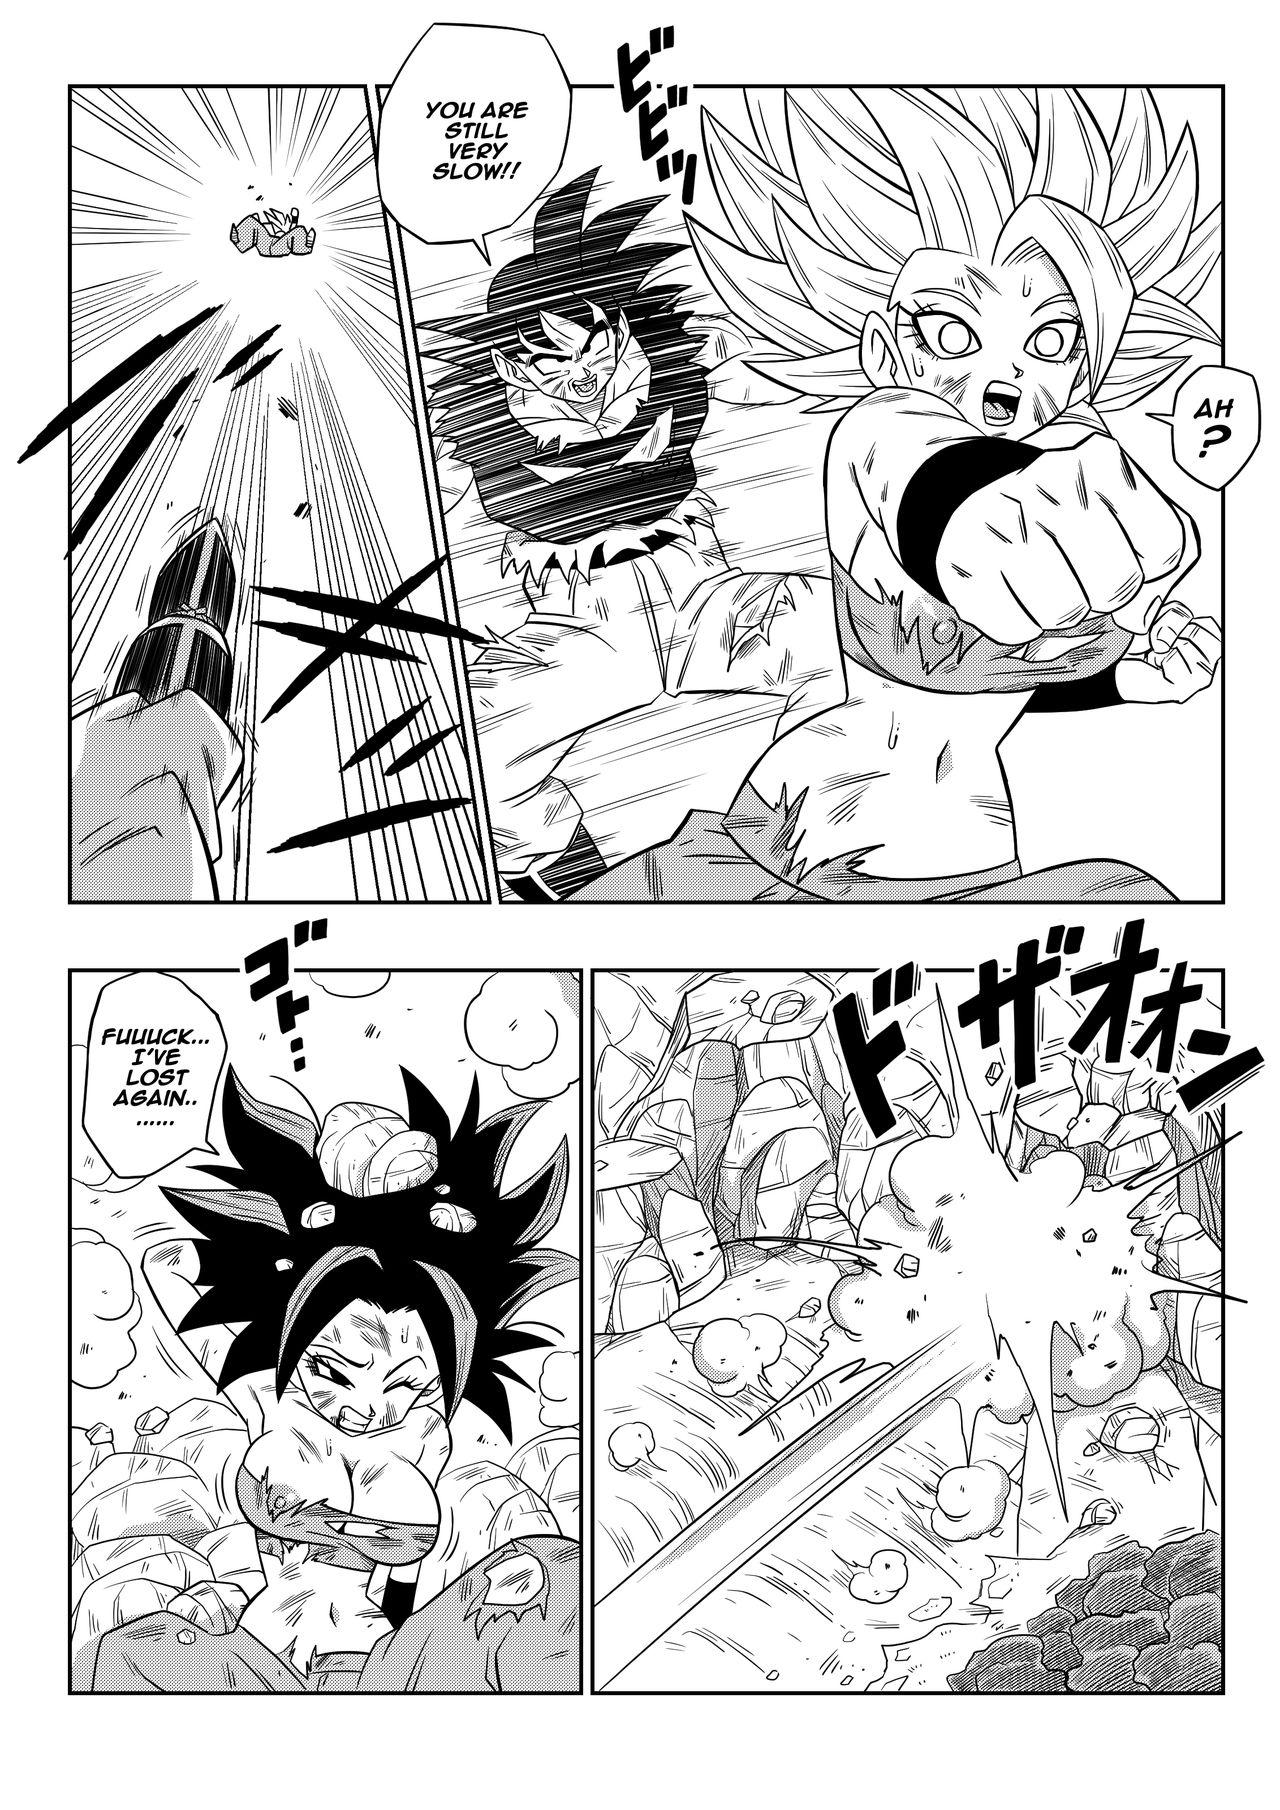 Pornstar Fight in the 6th Universe!!! - Dragon ball super Parties - Page 5